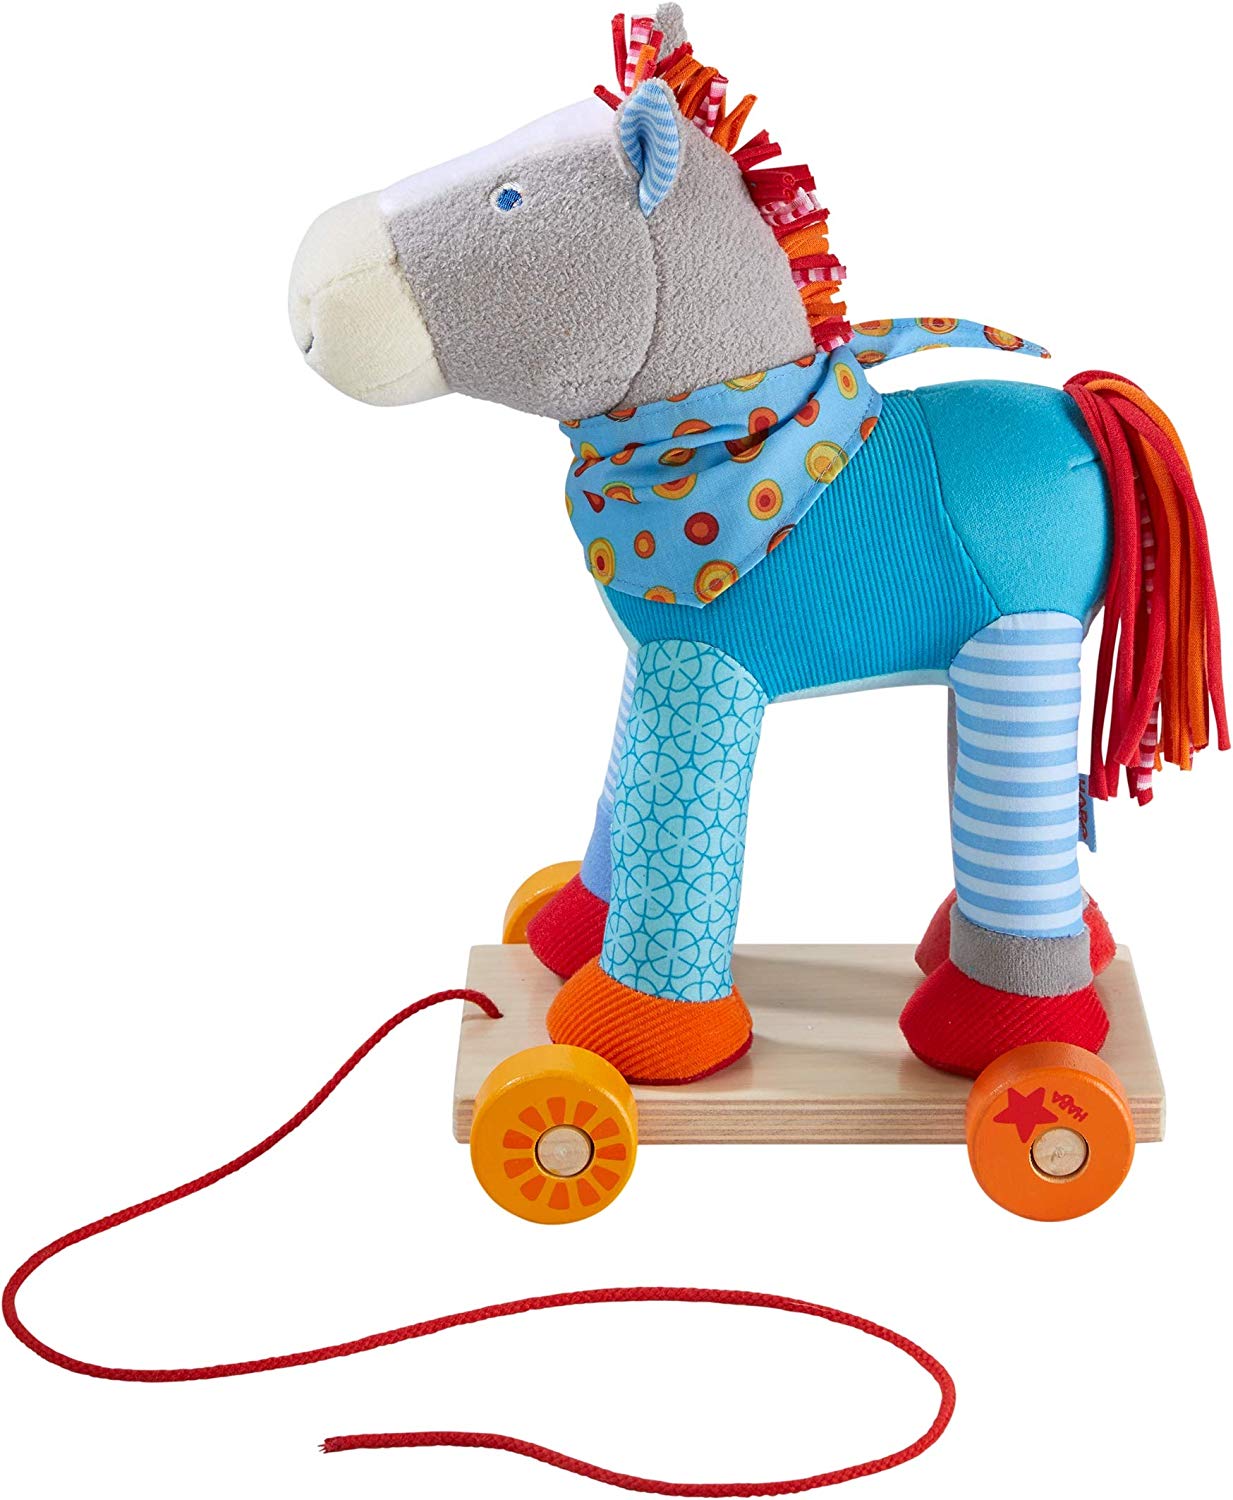 Haba 304142 Colourful Horse Pull On Toy With Rolling Board And Cuddly Toy, 